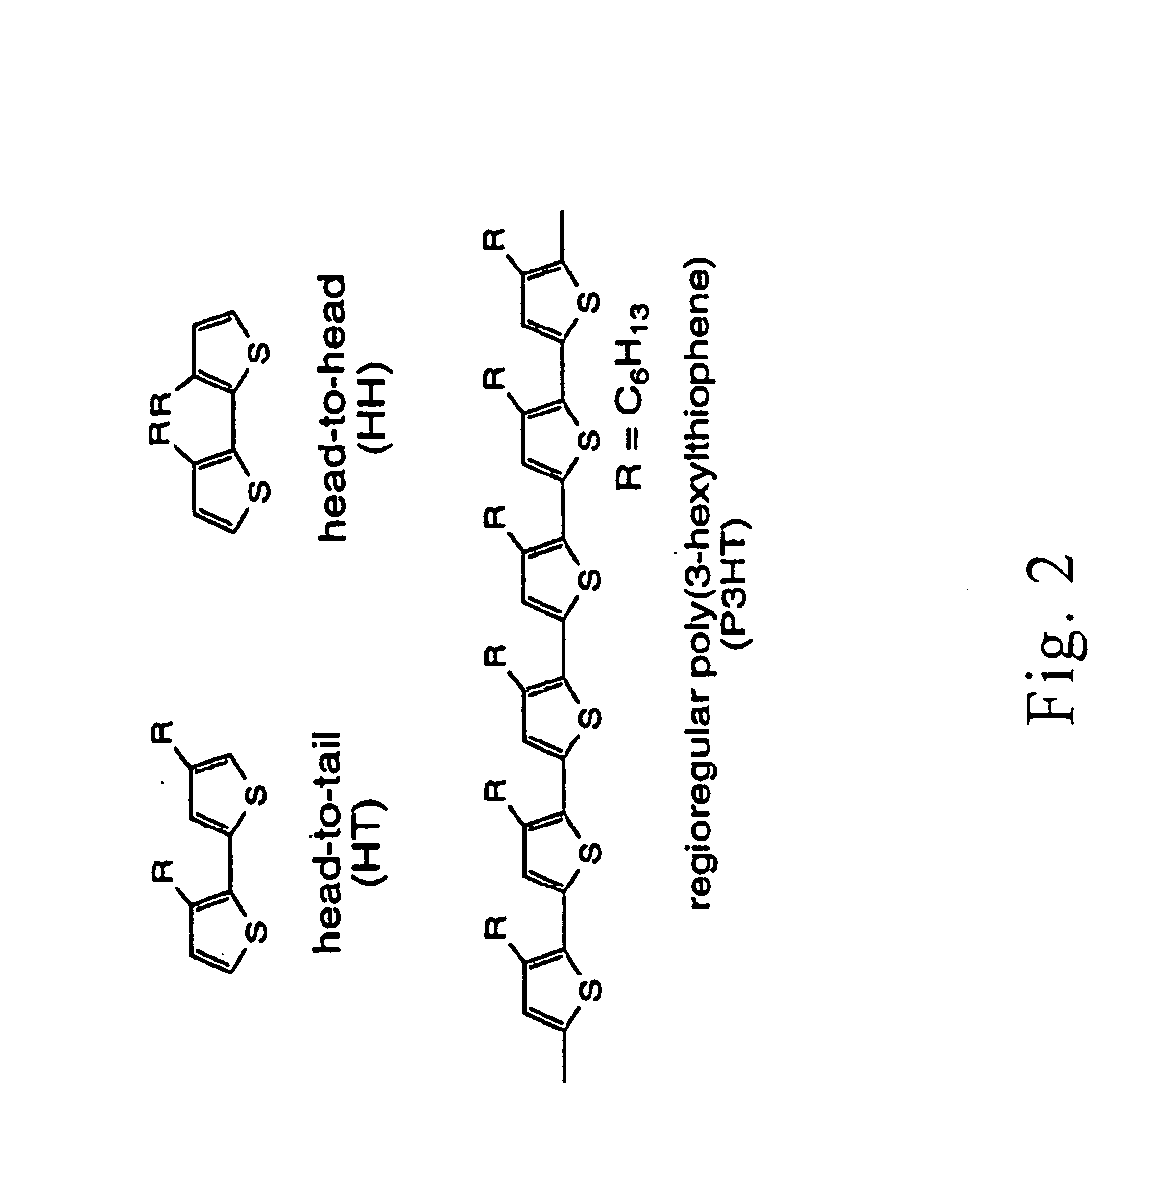 Device having an organic transistor integrated with an organic light-emitting diode's heterojunctions